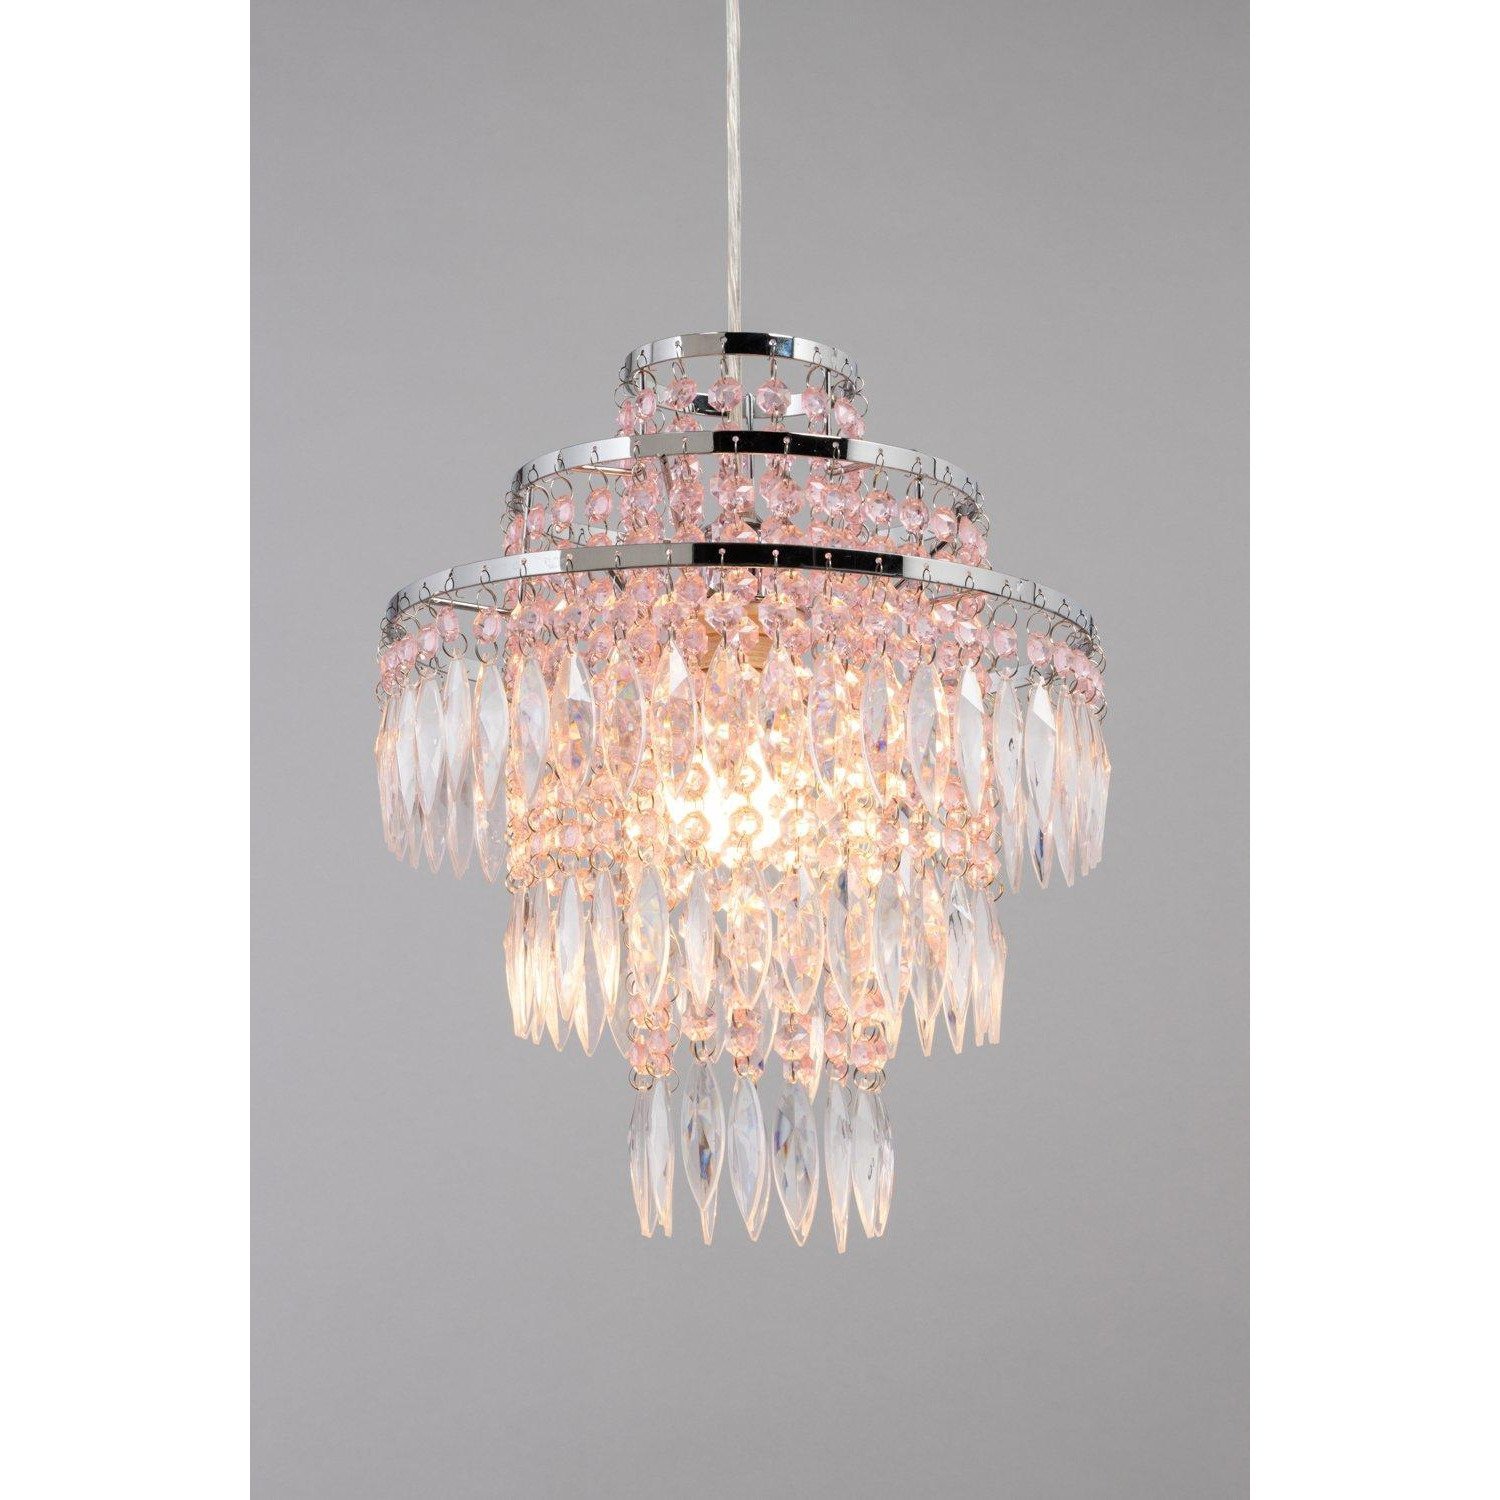 Glow Jewelled Easy Fit Light Shade - image 1